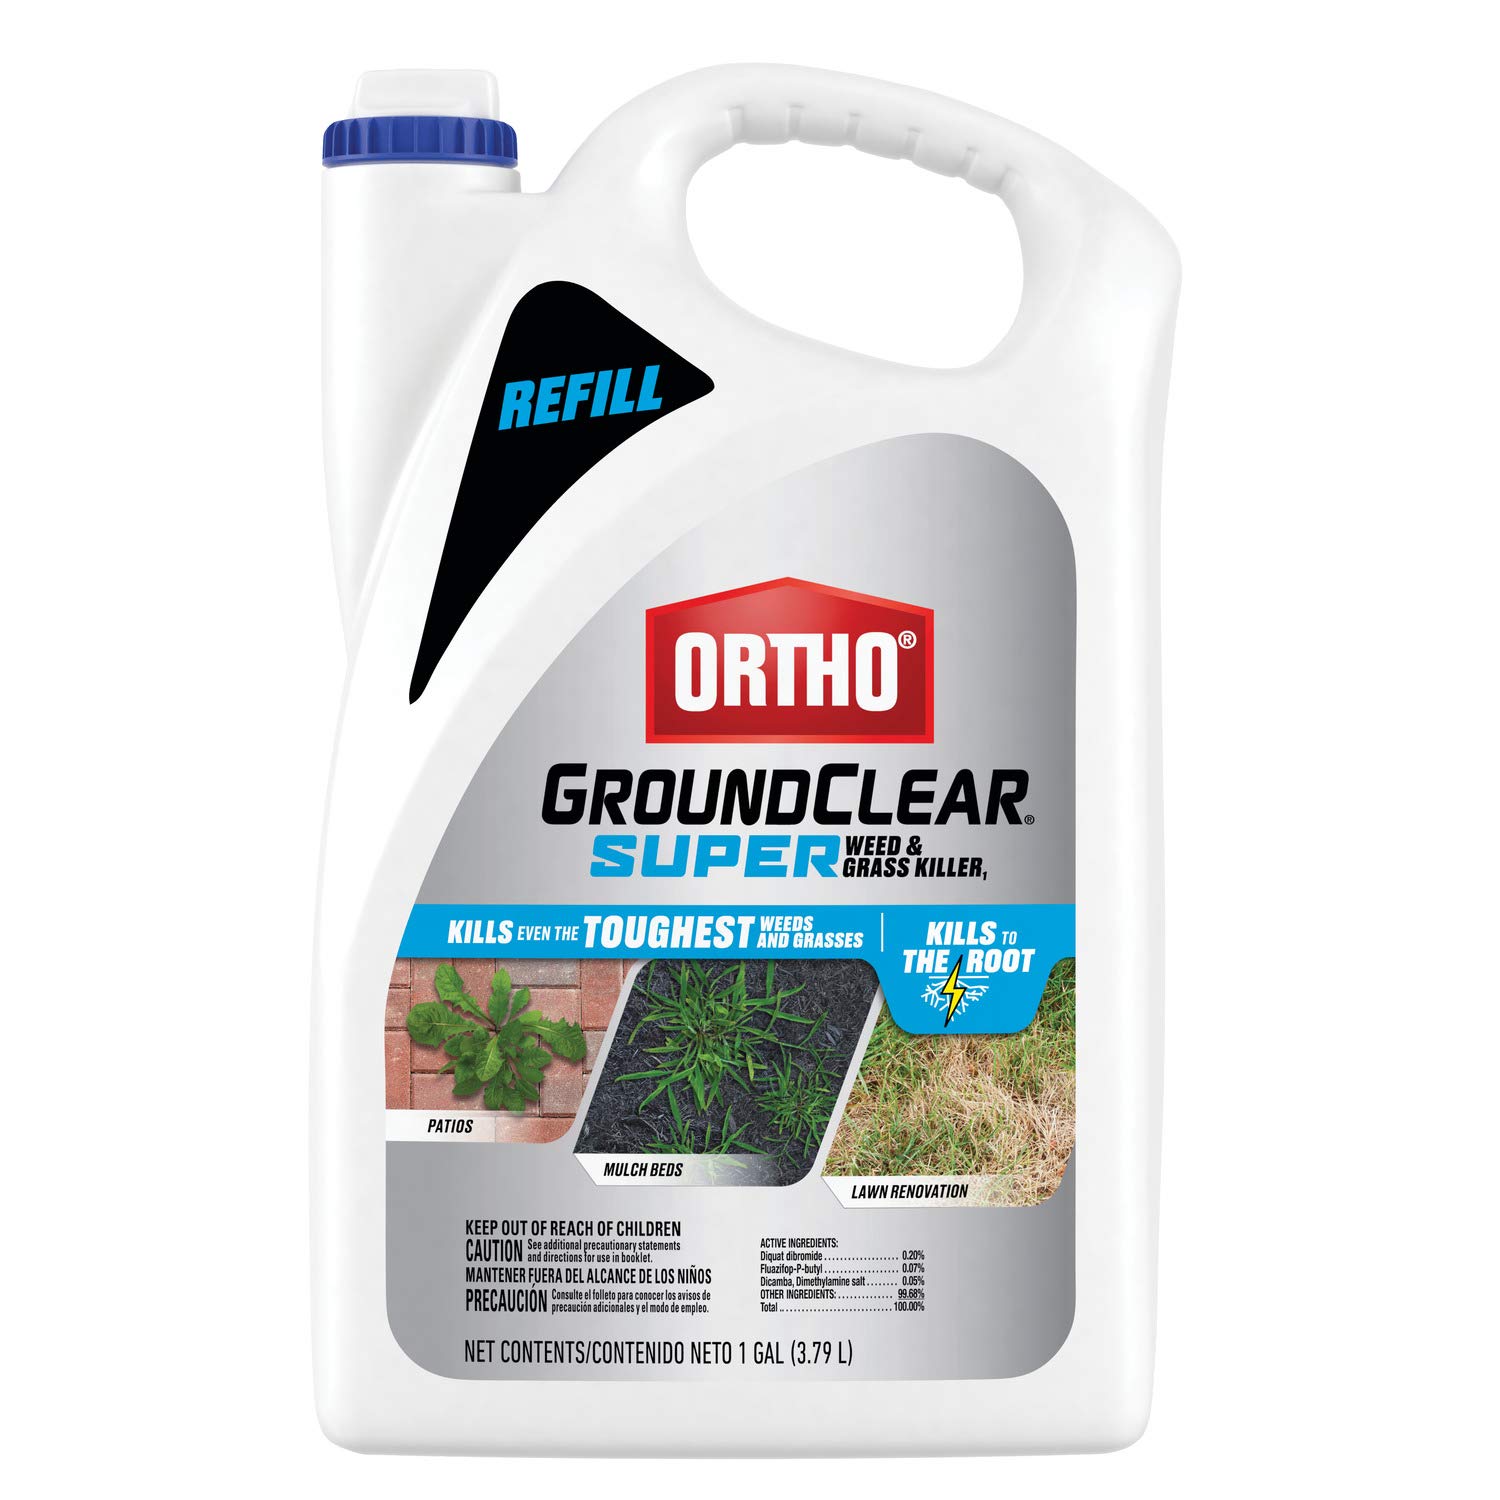 1-Gal Ortho GroundClear Super Weed & Grass Killer Refill $8.97 + Free Shipping w/ Prime or on orders over $35